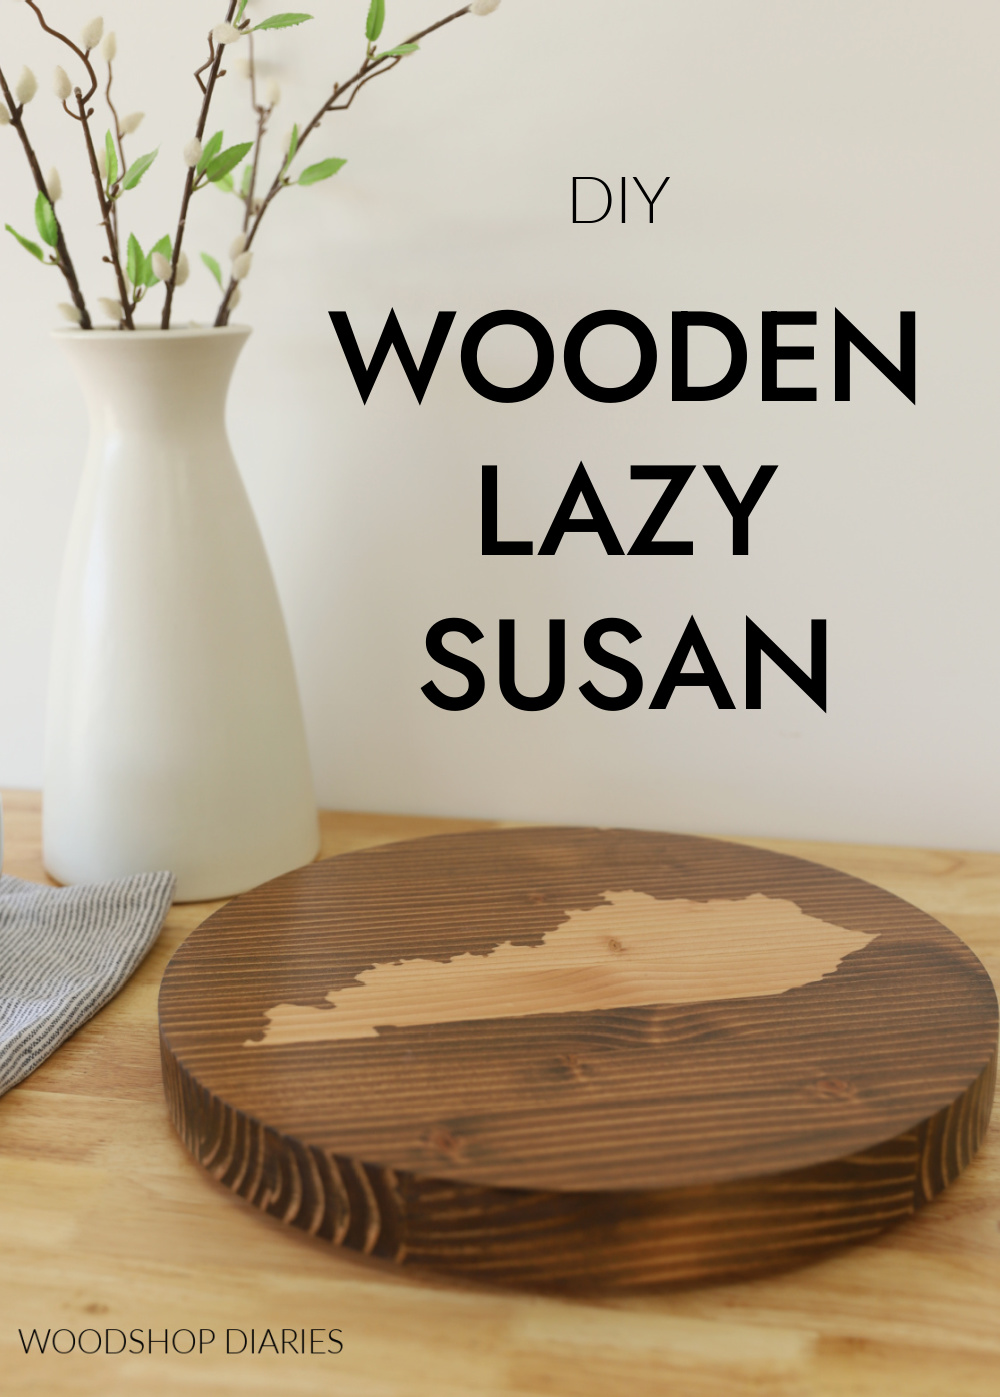 Pinterest image showing wooden DIY lazy susan with text "DIY wooden lazy susan" above it